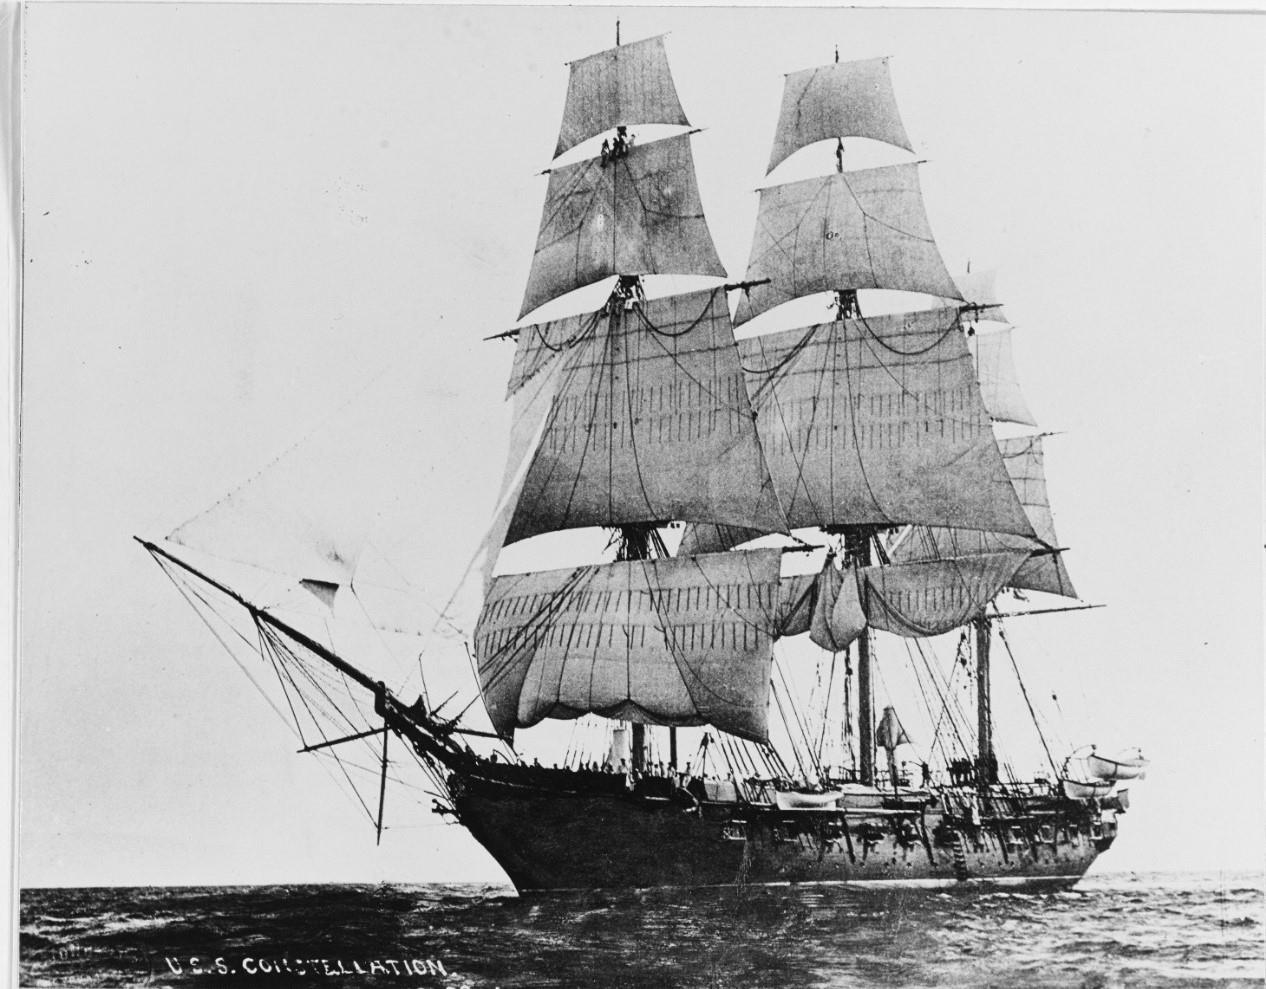 njnavyguy:
“
Naval History & Heritage Command
The sloop-of-war, USS Constellation, captures the American slaver Cora off the Congo River #OTD in 1860.
”